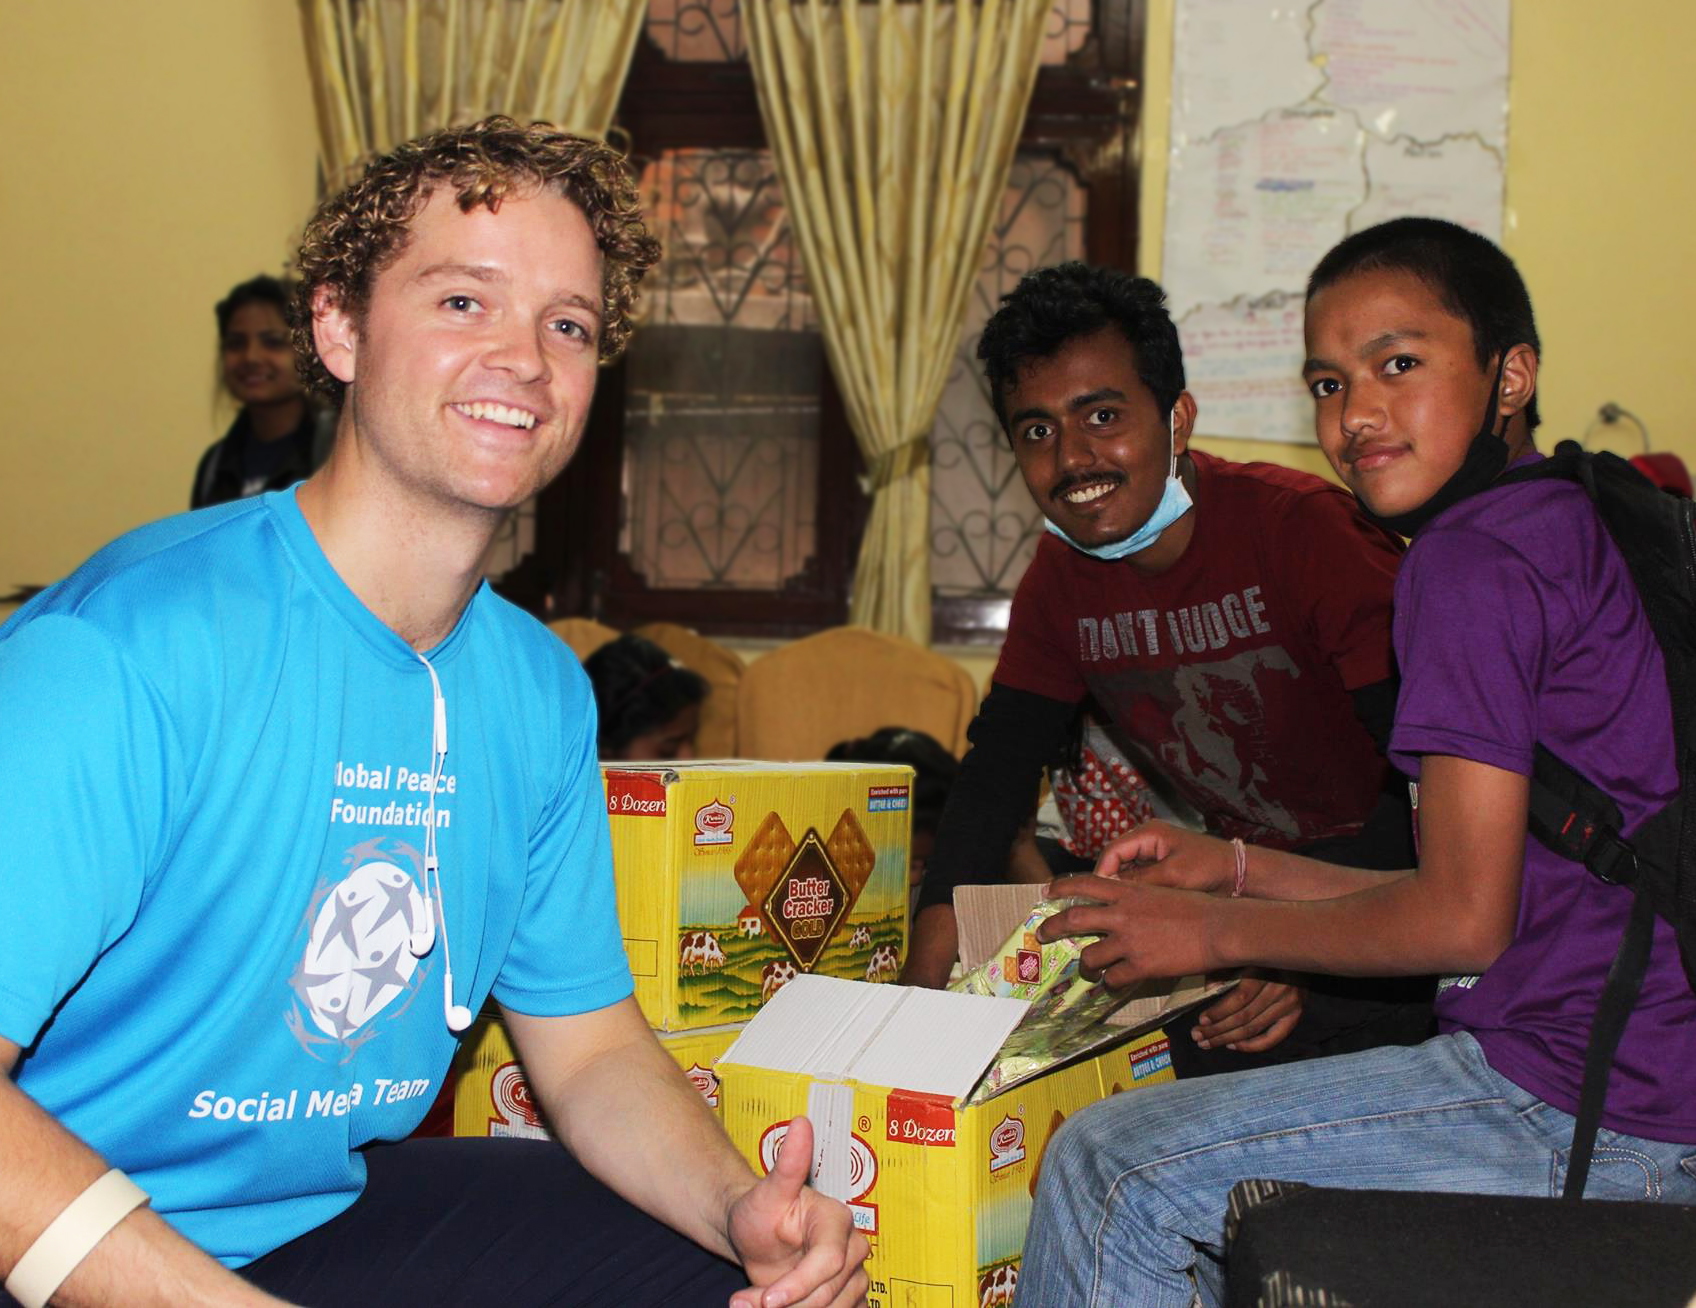 Founder of the Student Volunteer Army from Christchurch, NZ and member of the Asia Pacific Peace and Development Service Alliance  brings his years experience coordinating student volunteer efforts for disaster relief